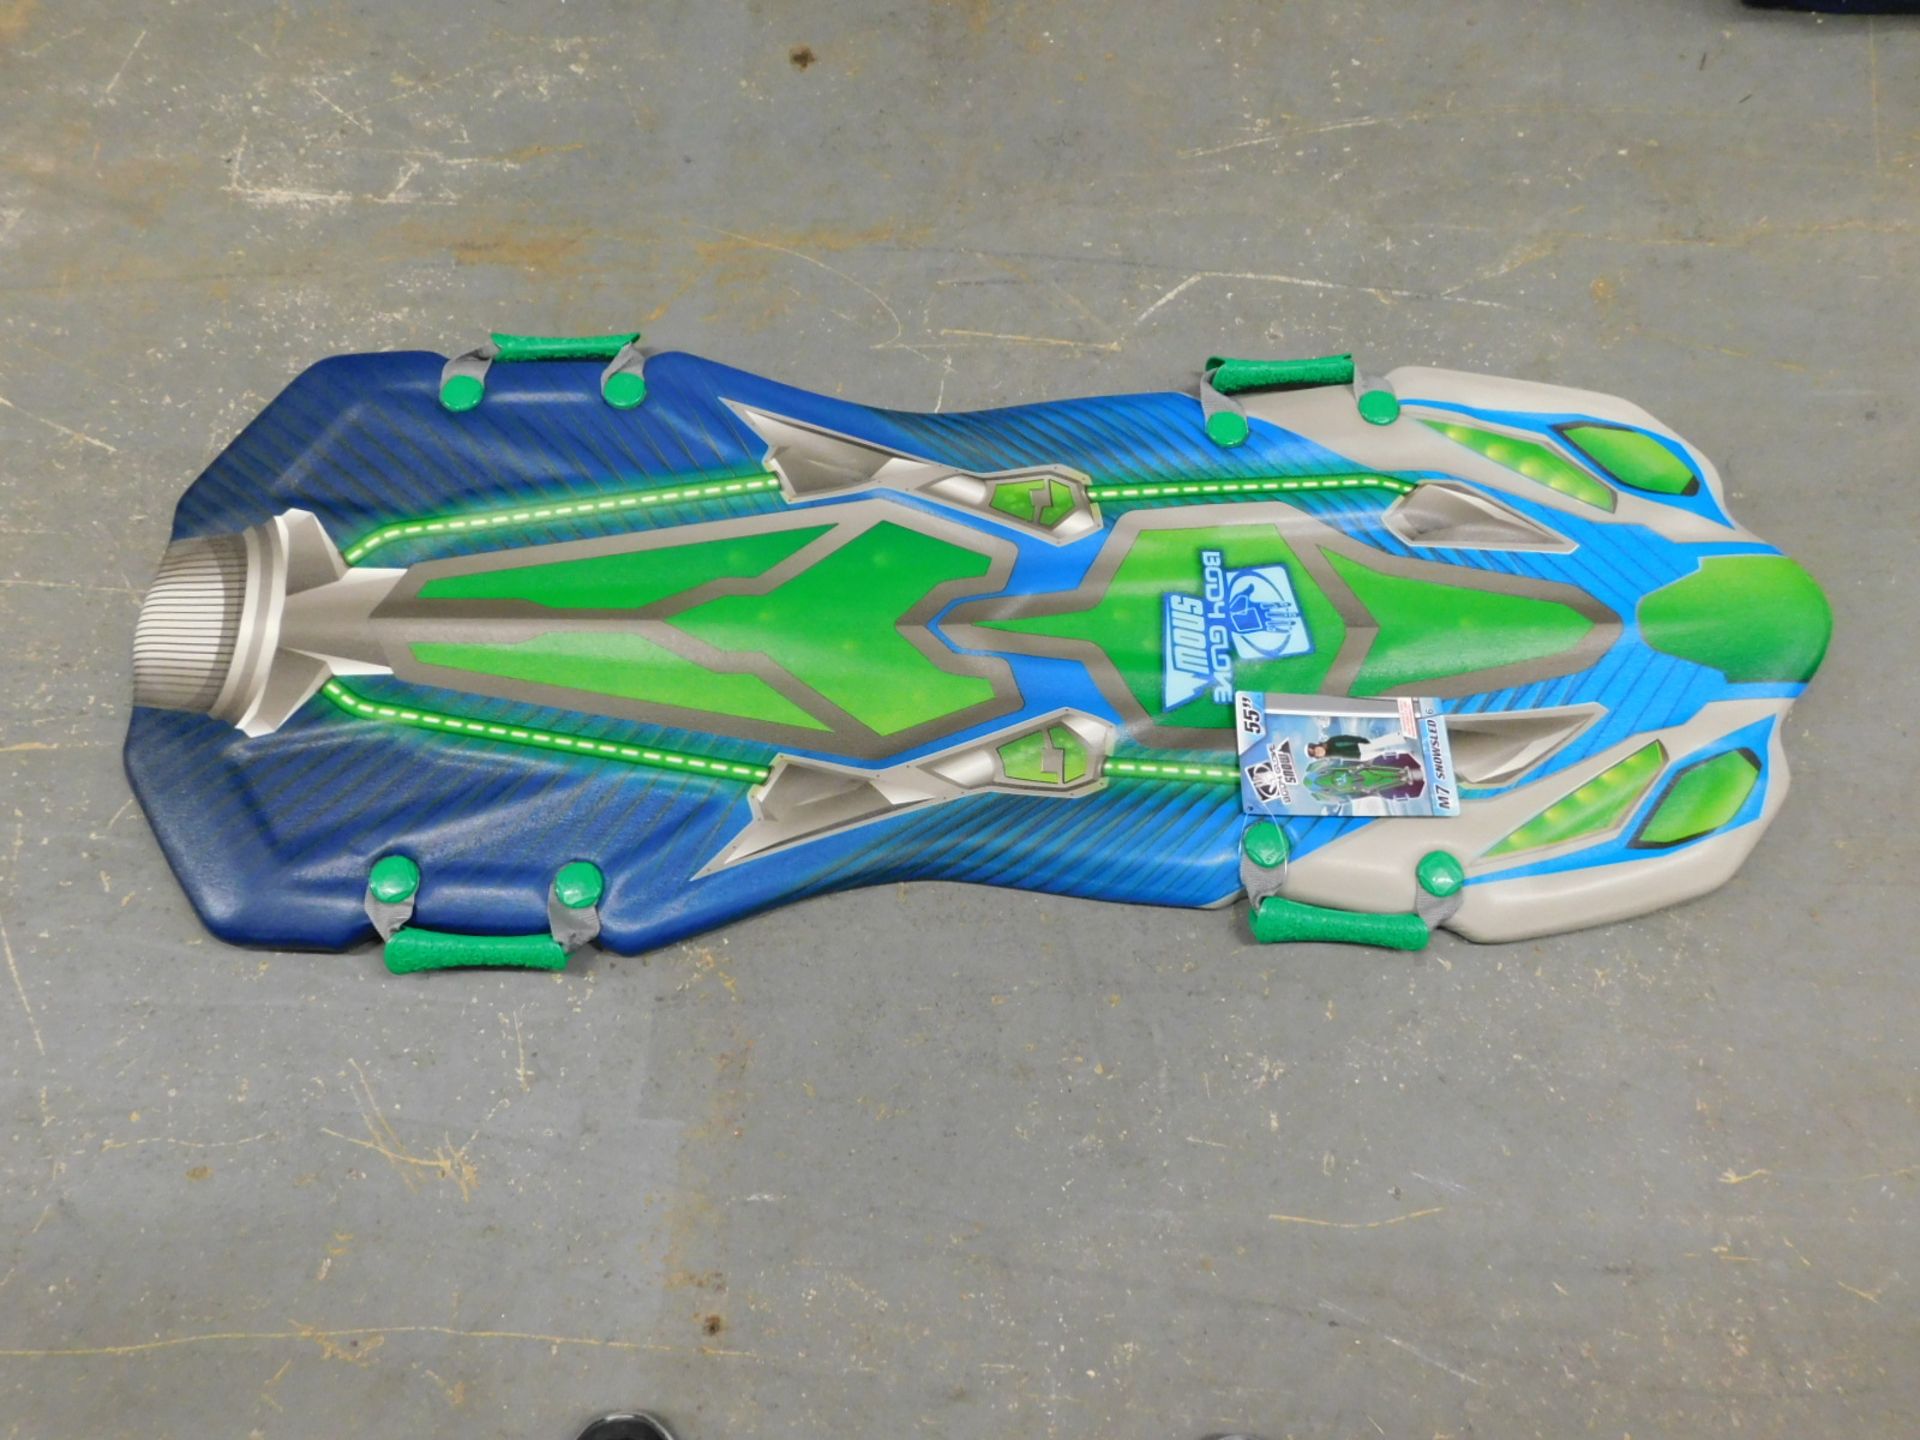 1 BRAND NEW BODY GLOVE M7 55" 2 PERSON SNOW SLED IN GREEN RRP £29.99